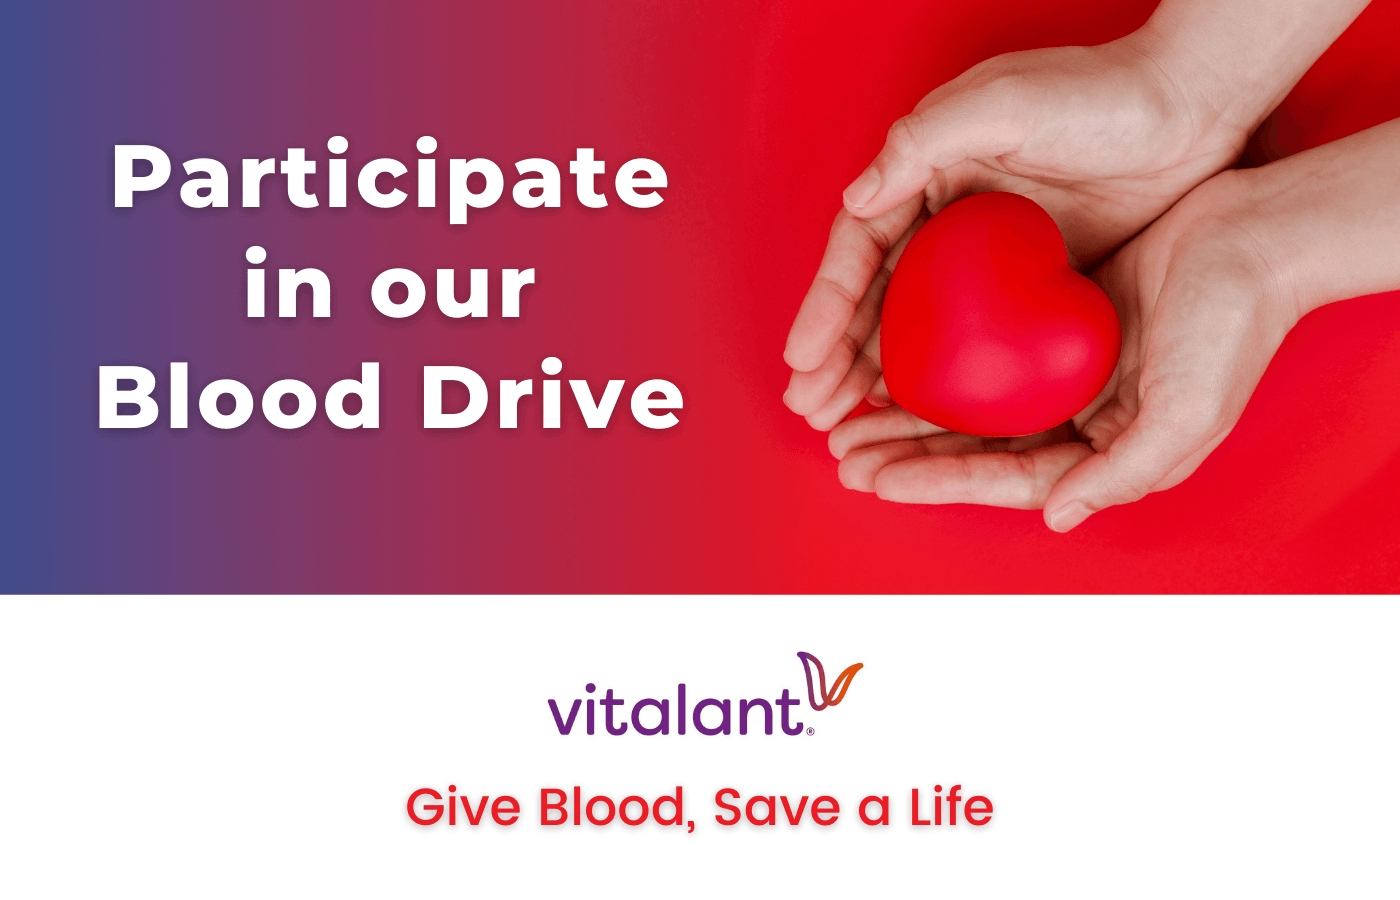 Participate in our blood drive